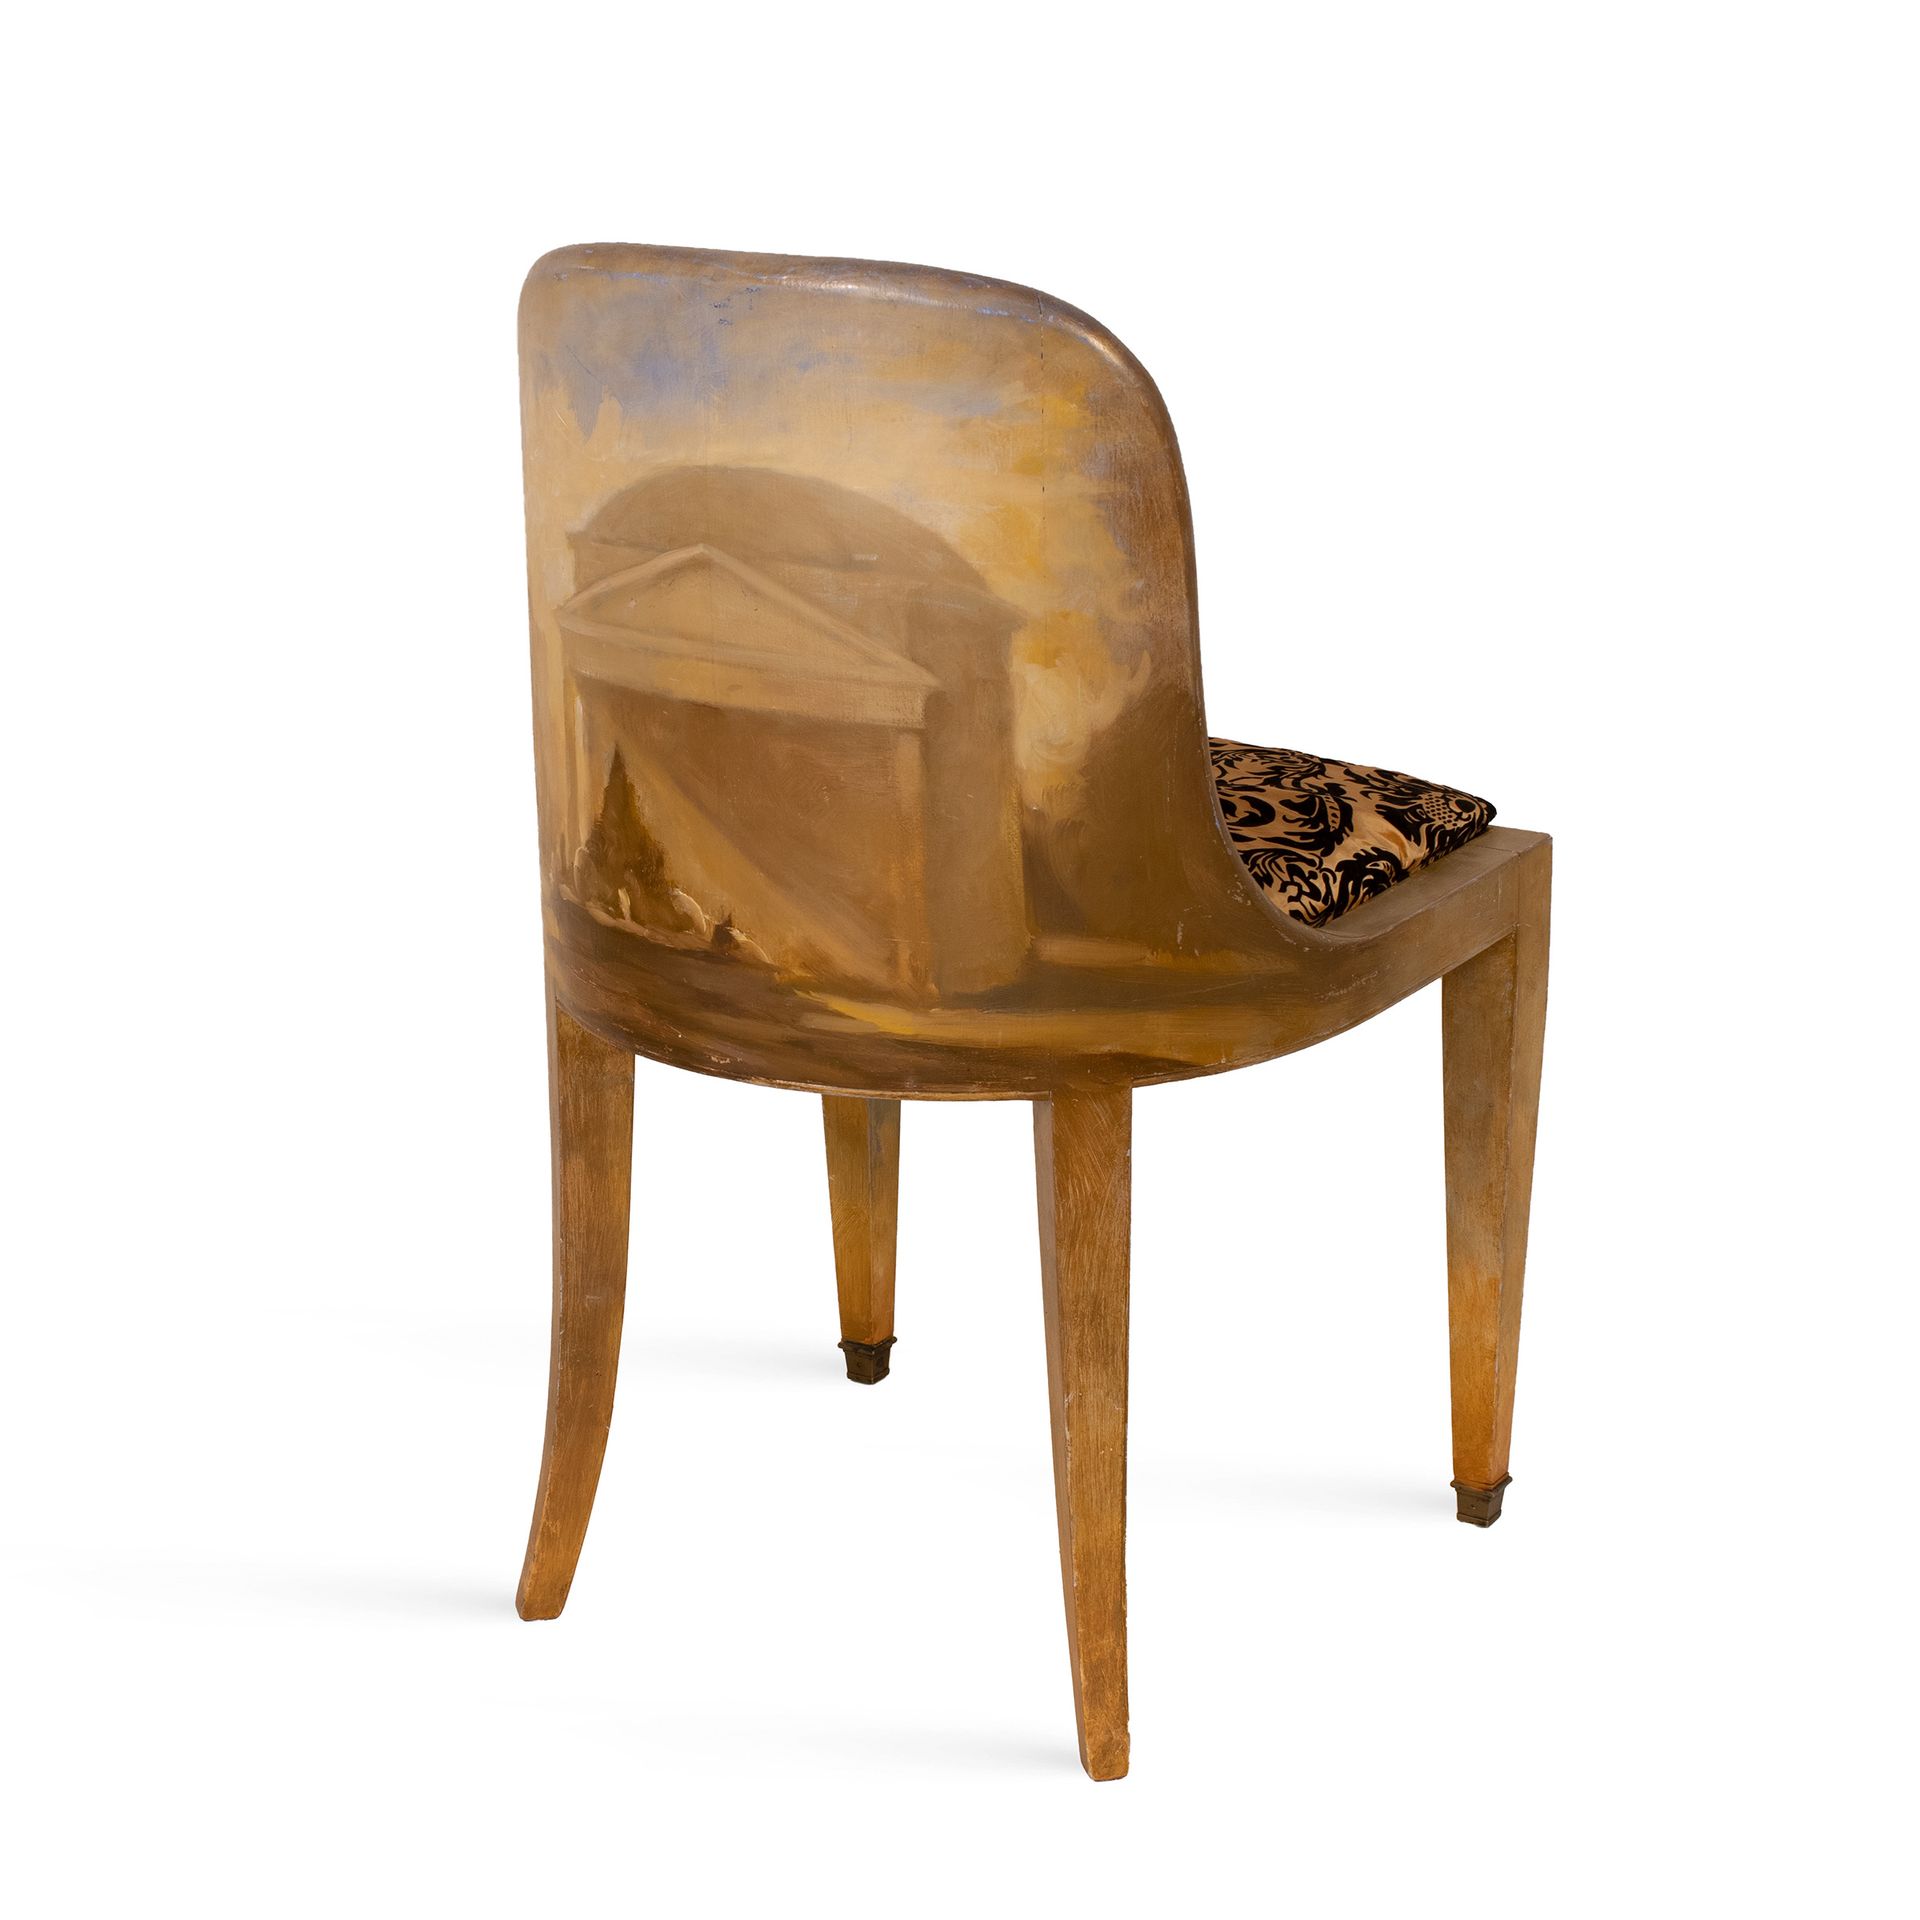 Anna Keen Isola di Wight 1968, 85x52x50cm. Painted chair in wood and upholstered&hellip;